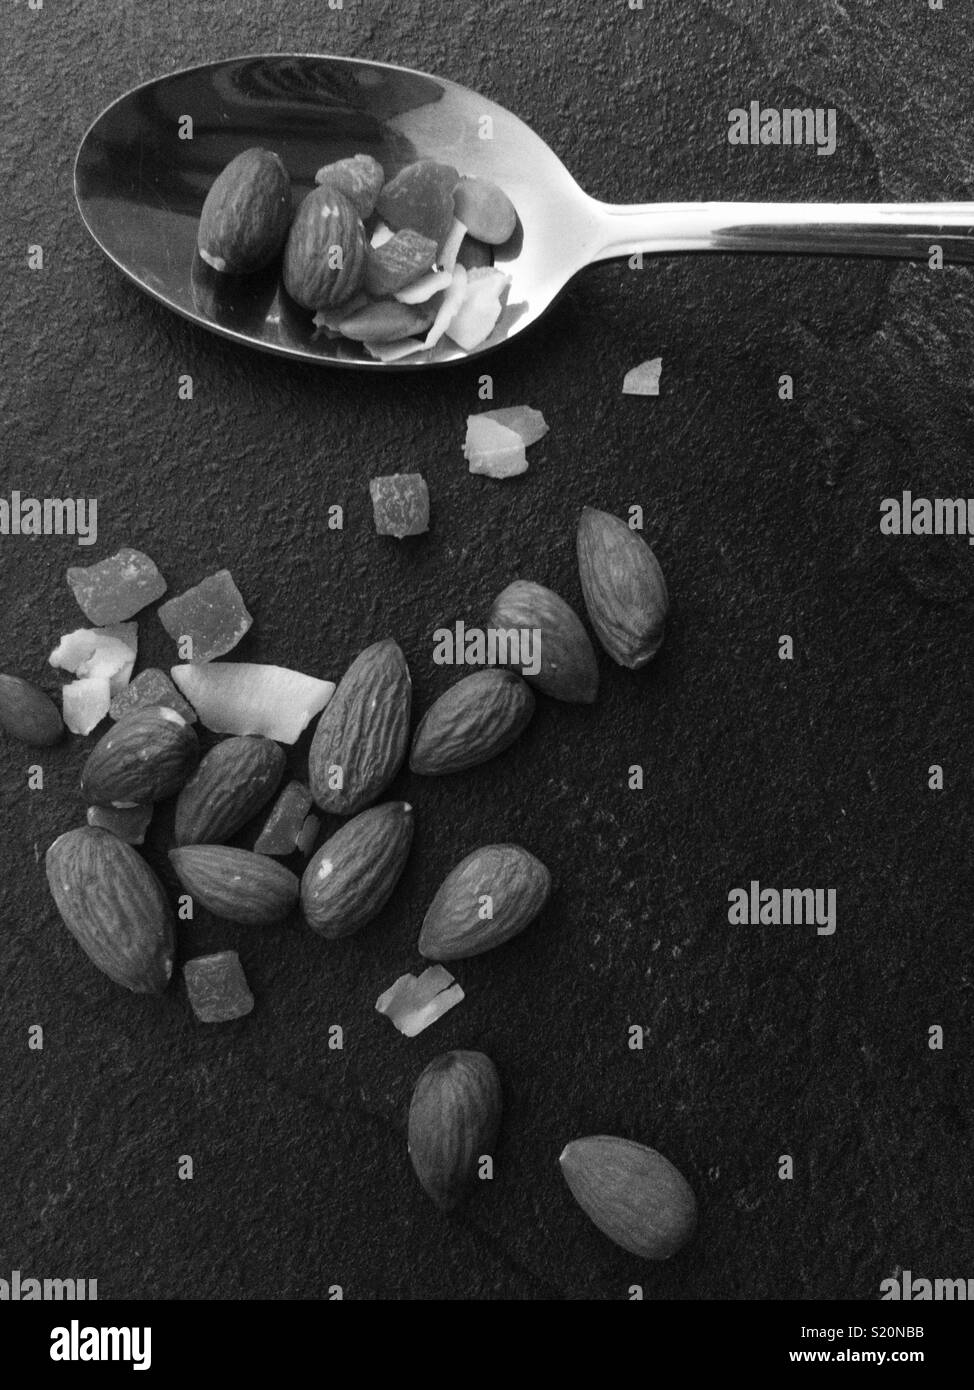 Black and white fruit, nuts and seeds on metal spoon Stock Photo